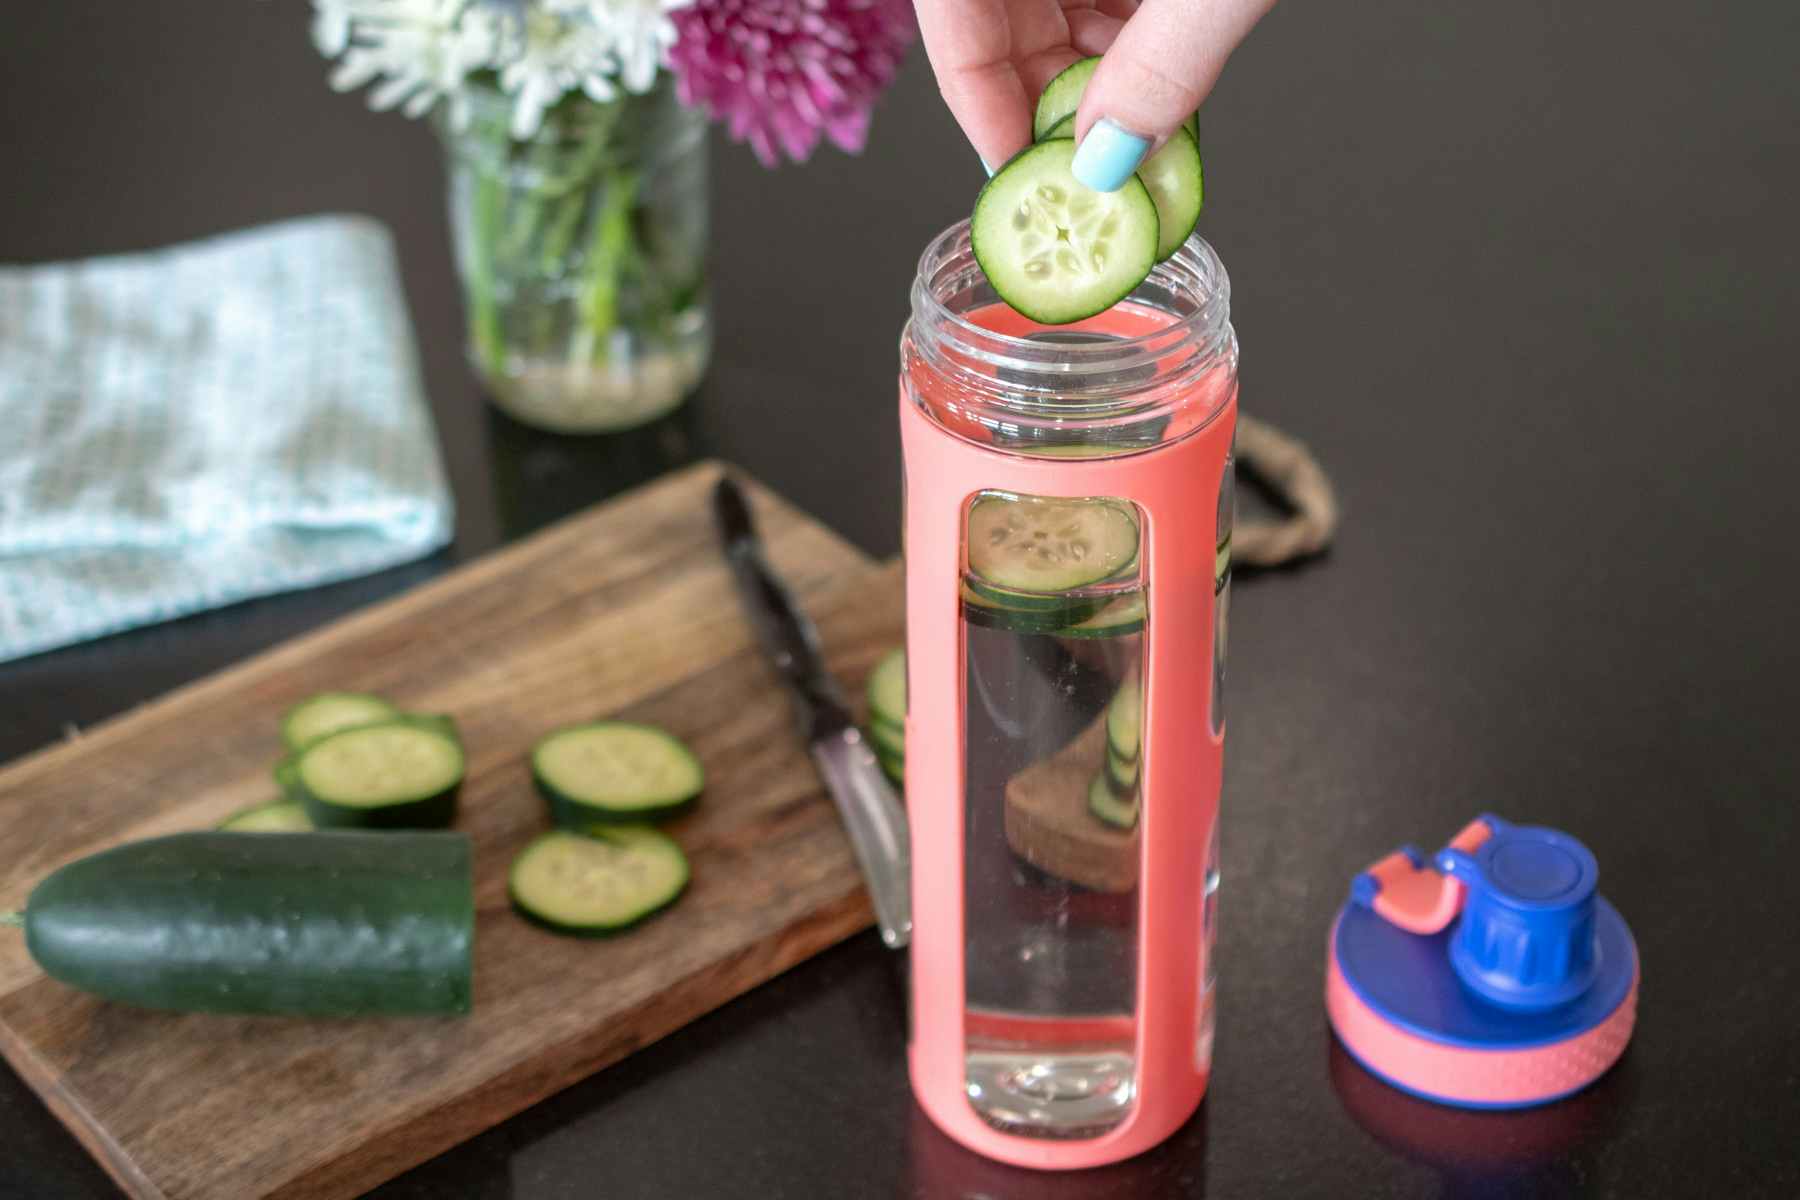 A person adding cucumber slices to a bottle of water.